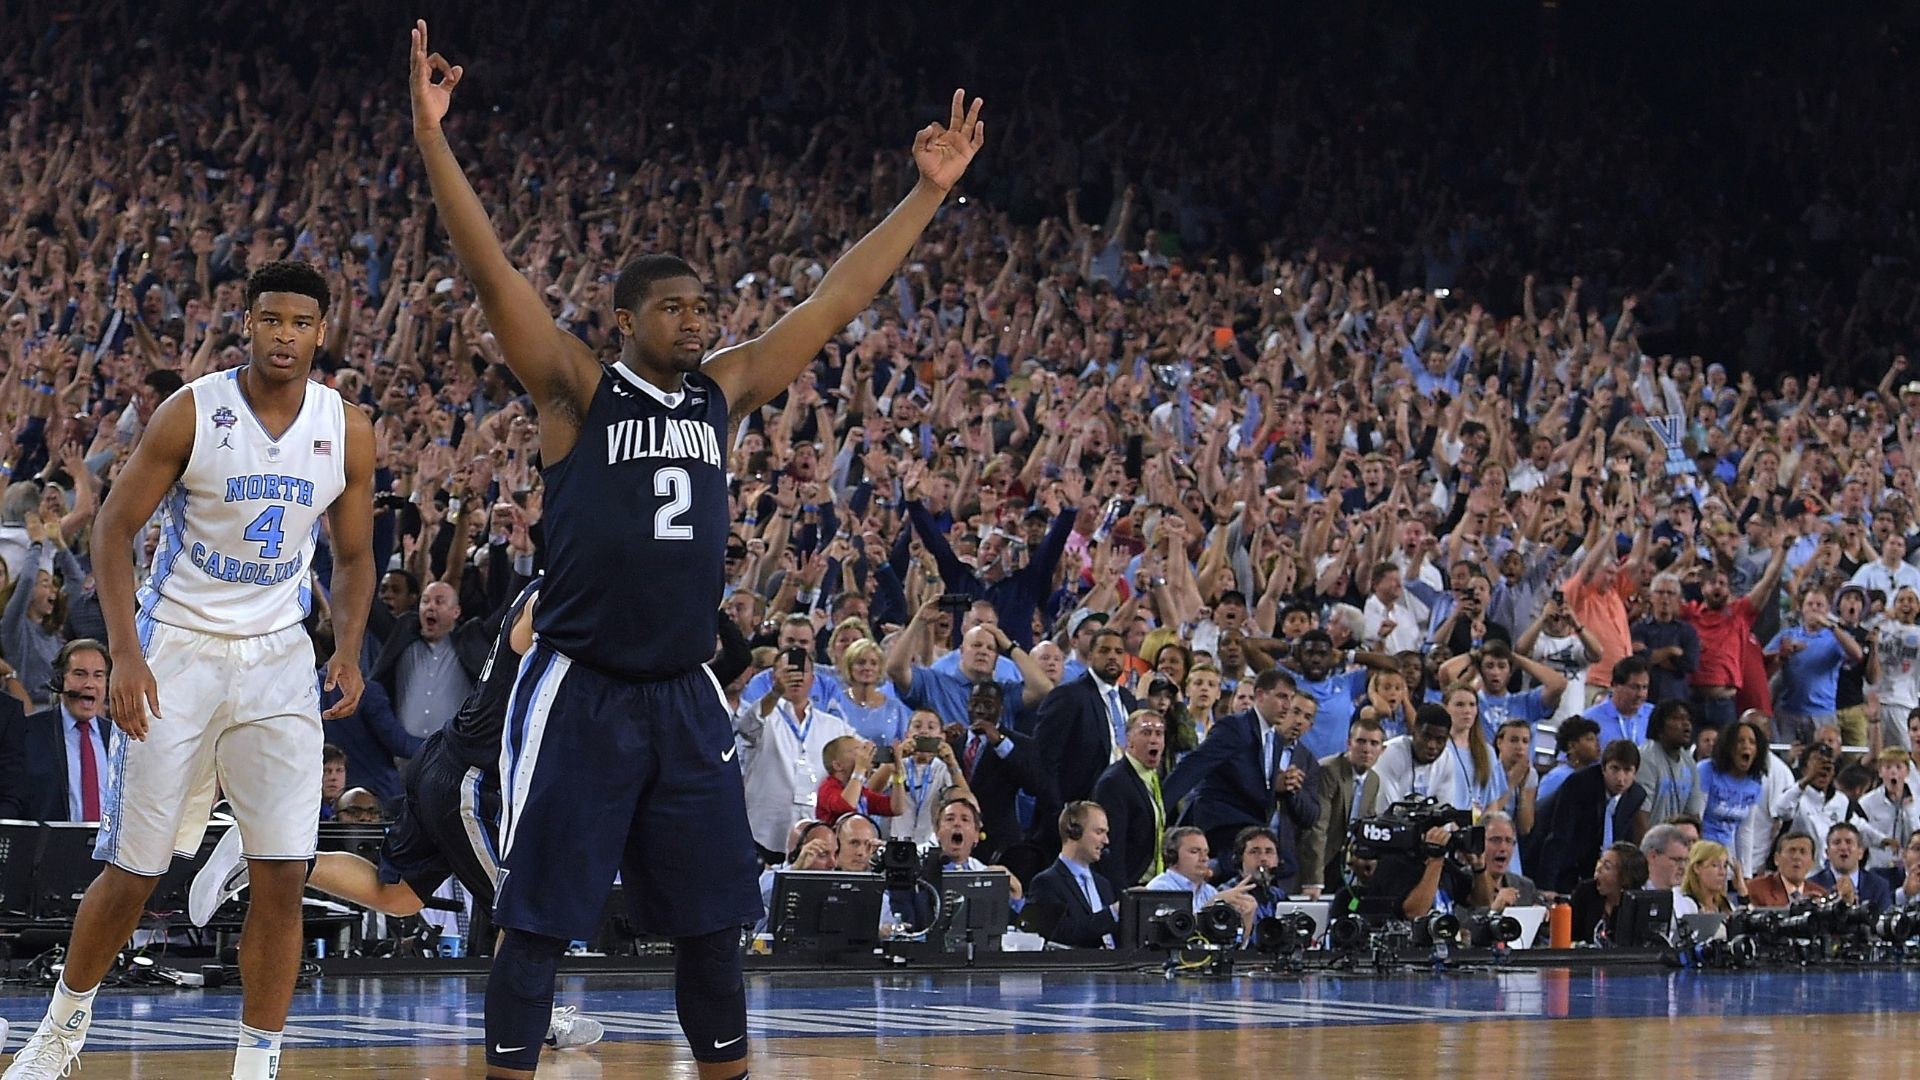 1920x1080 Wildcats, Tar Heels put on a show of clutch shooting in the final minutes